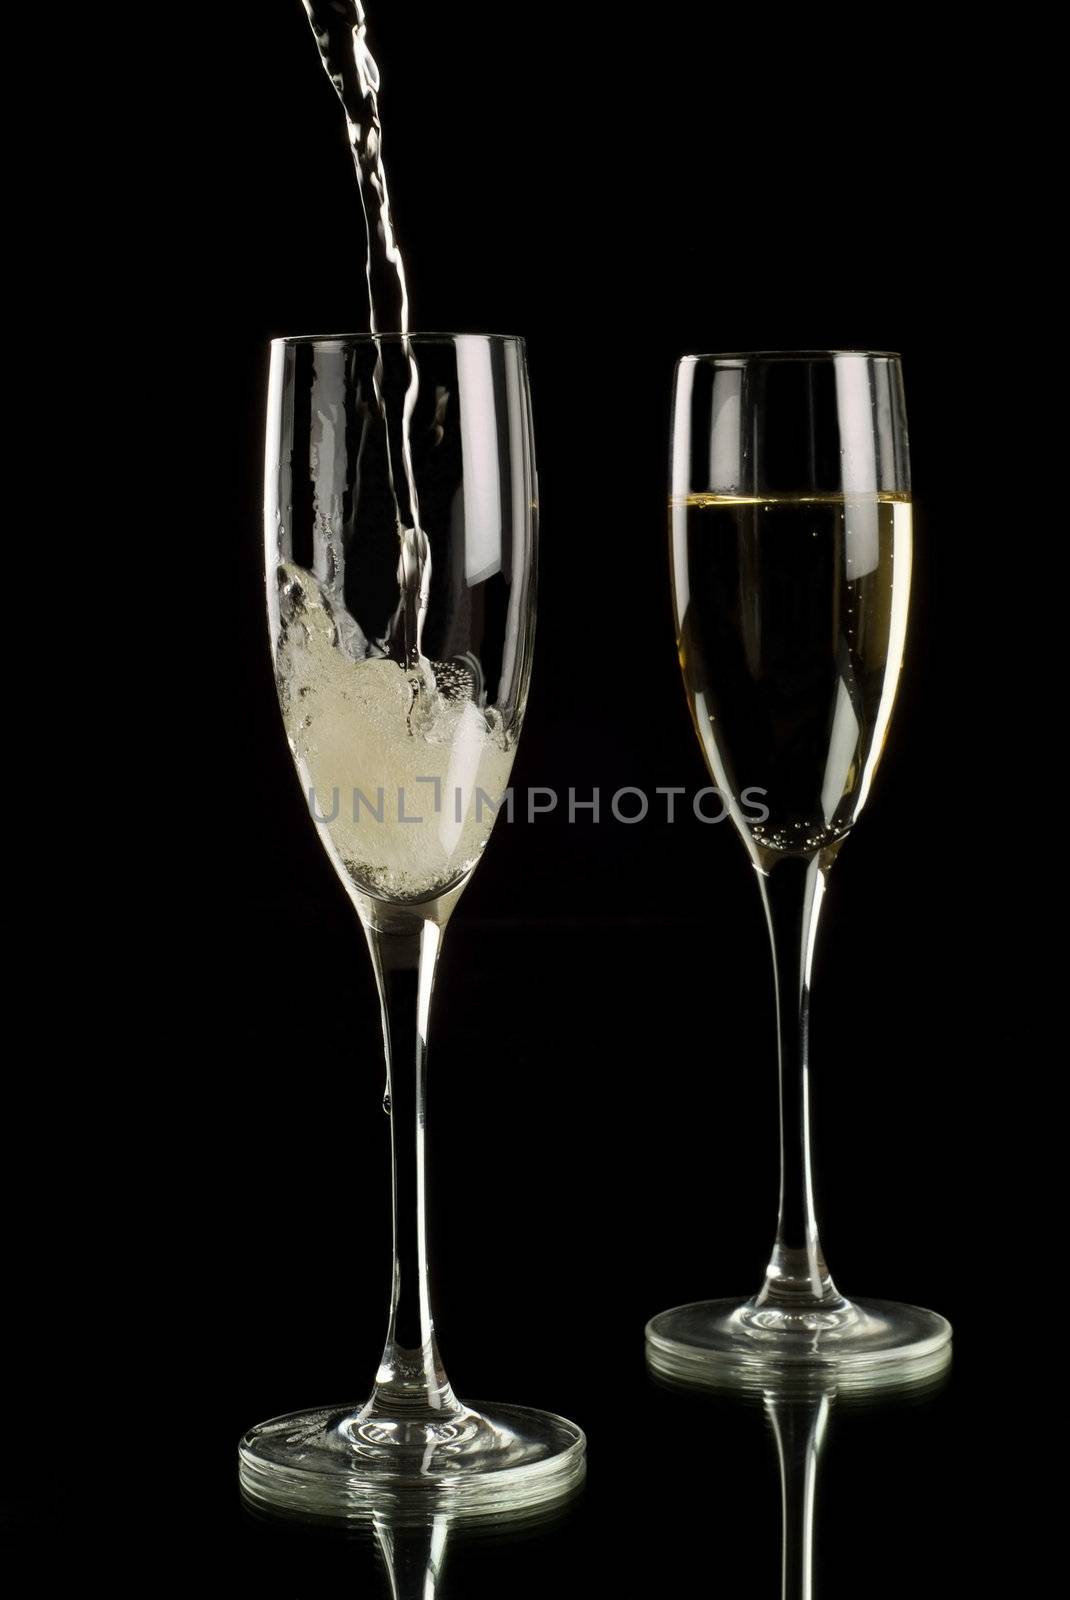 Sparkling wine poured into champagne flutes by alistaircotton